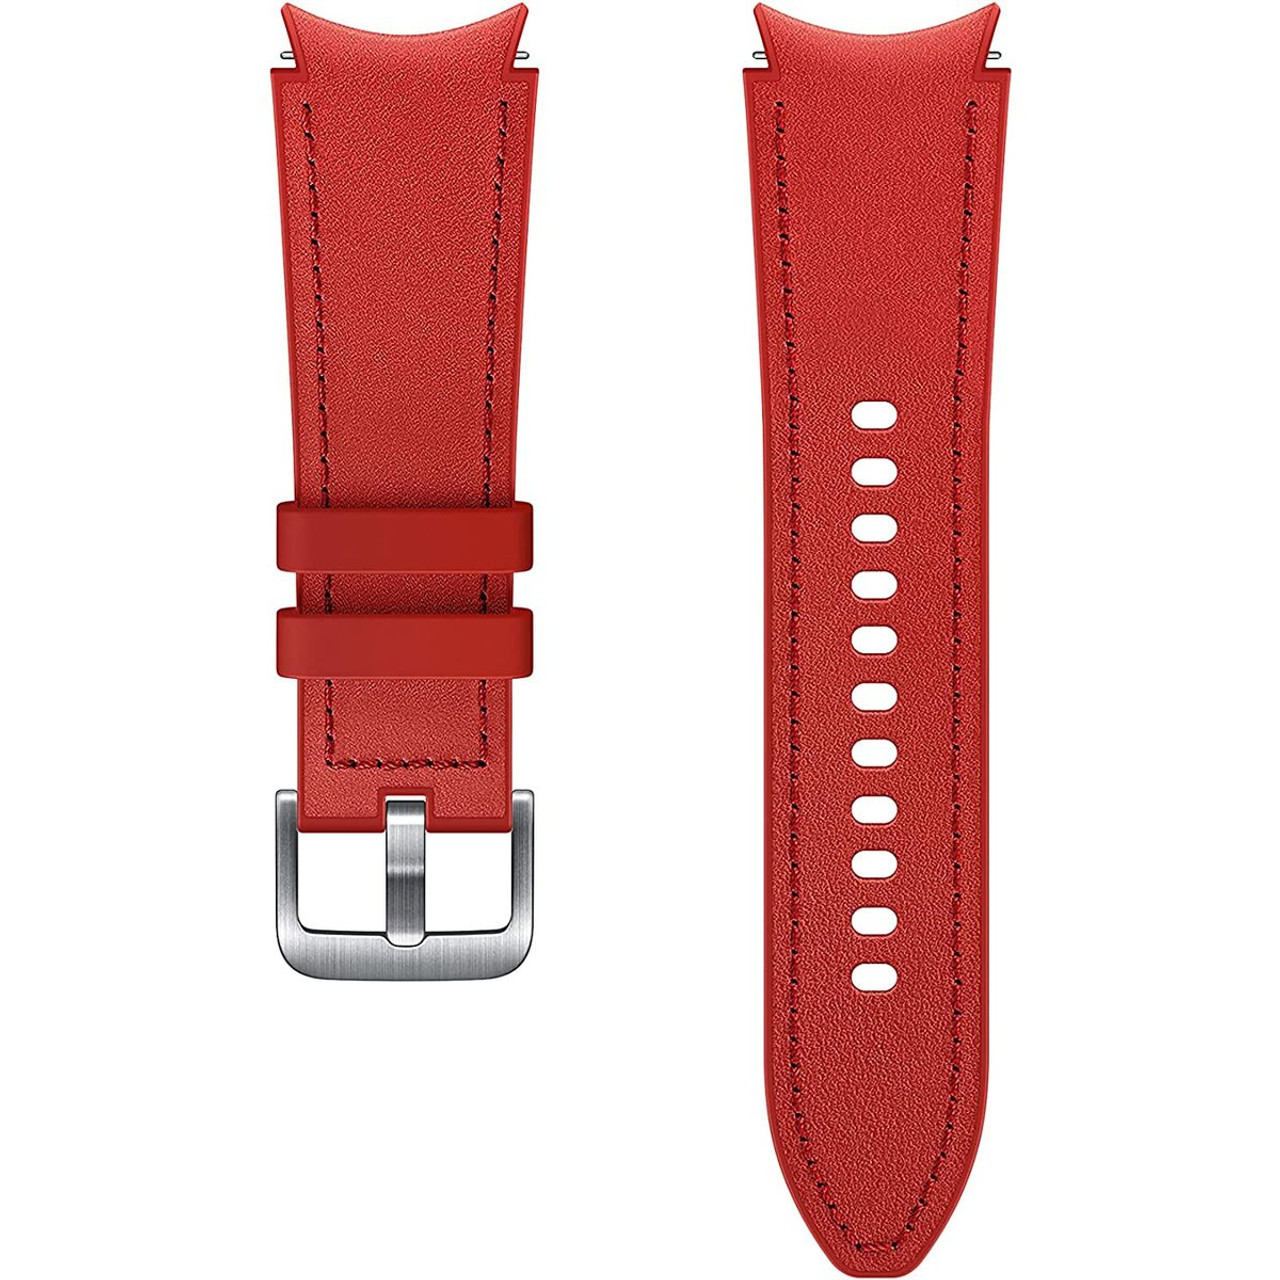 Samsung Hybrid Leather Band Strap for Galaxy Watch 4 product image